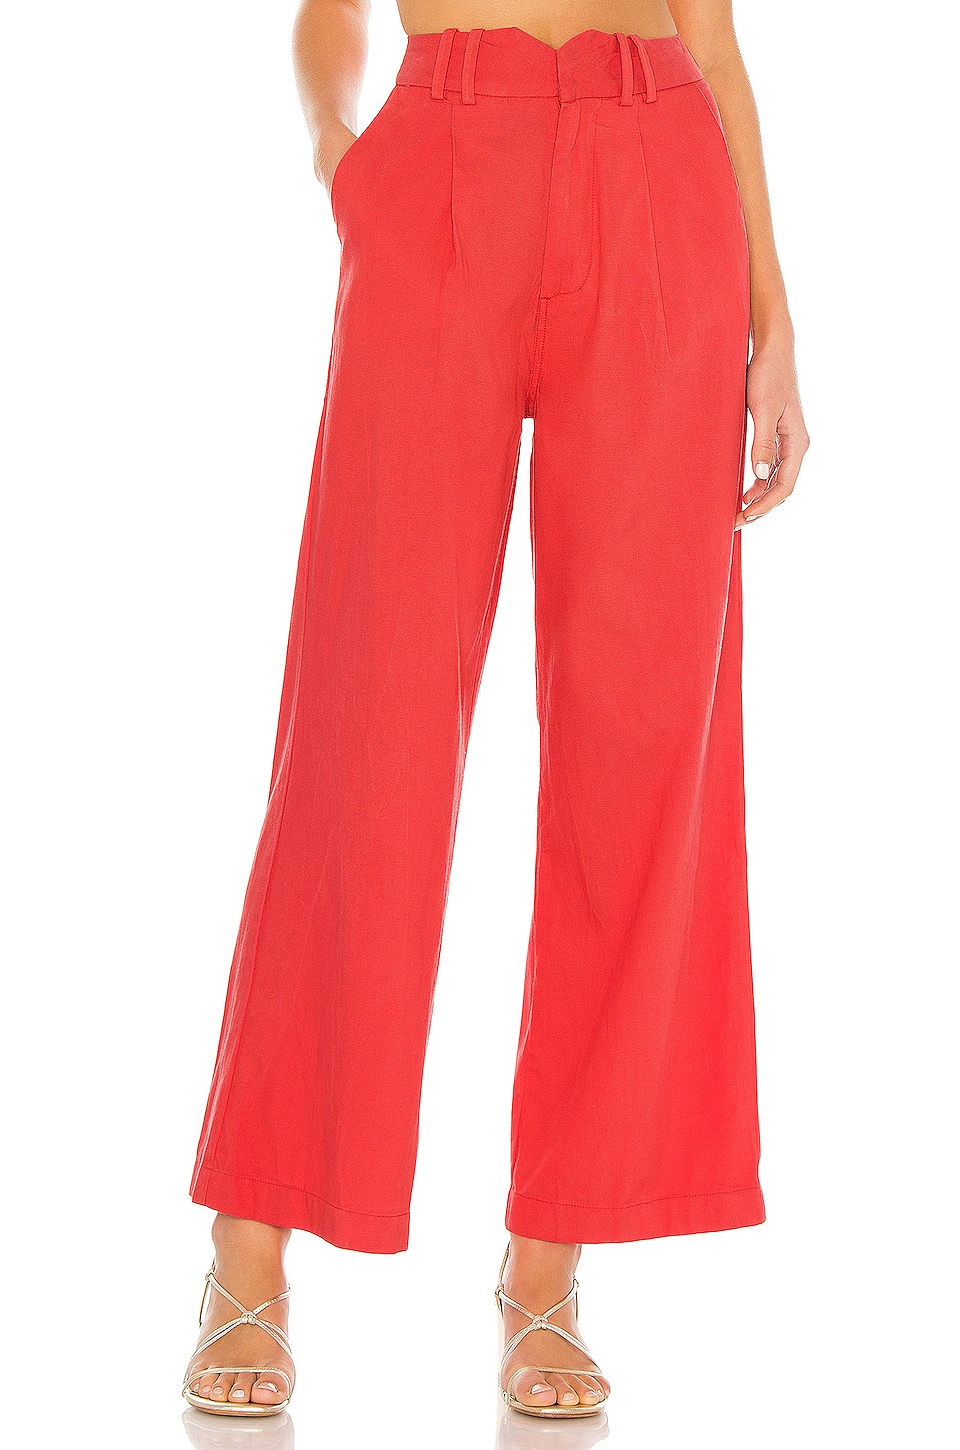 AMUSE SOCIETY Angelica Woven Pant in Spice | REVOLVE